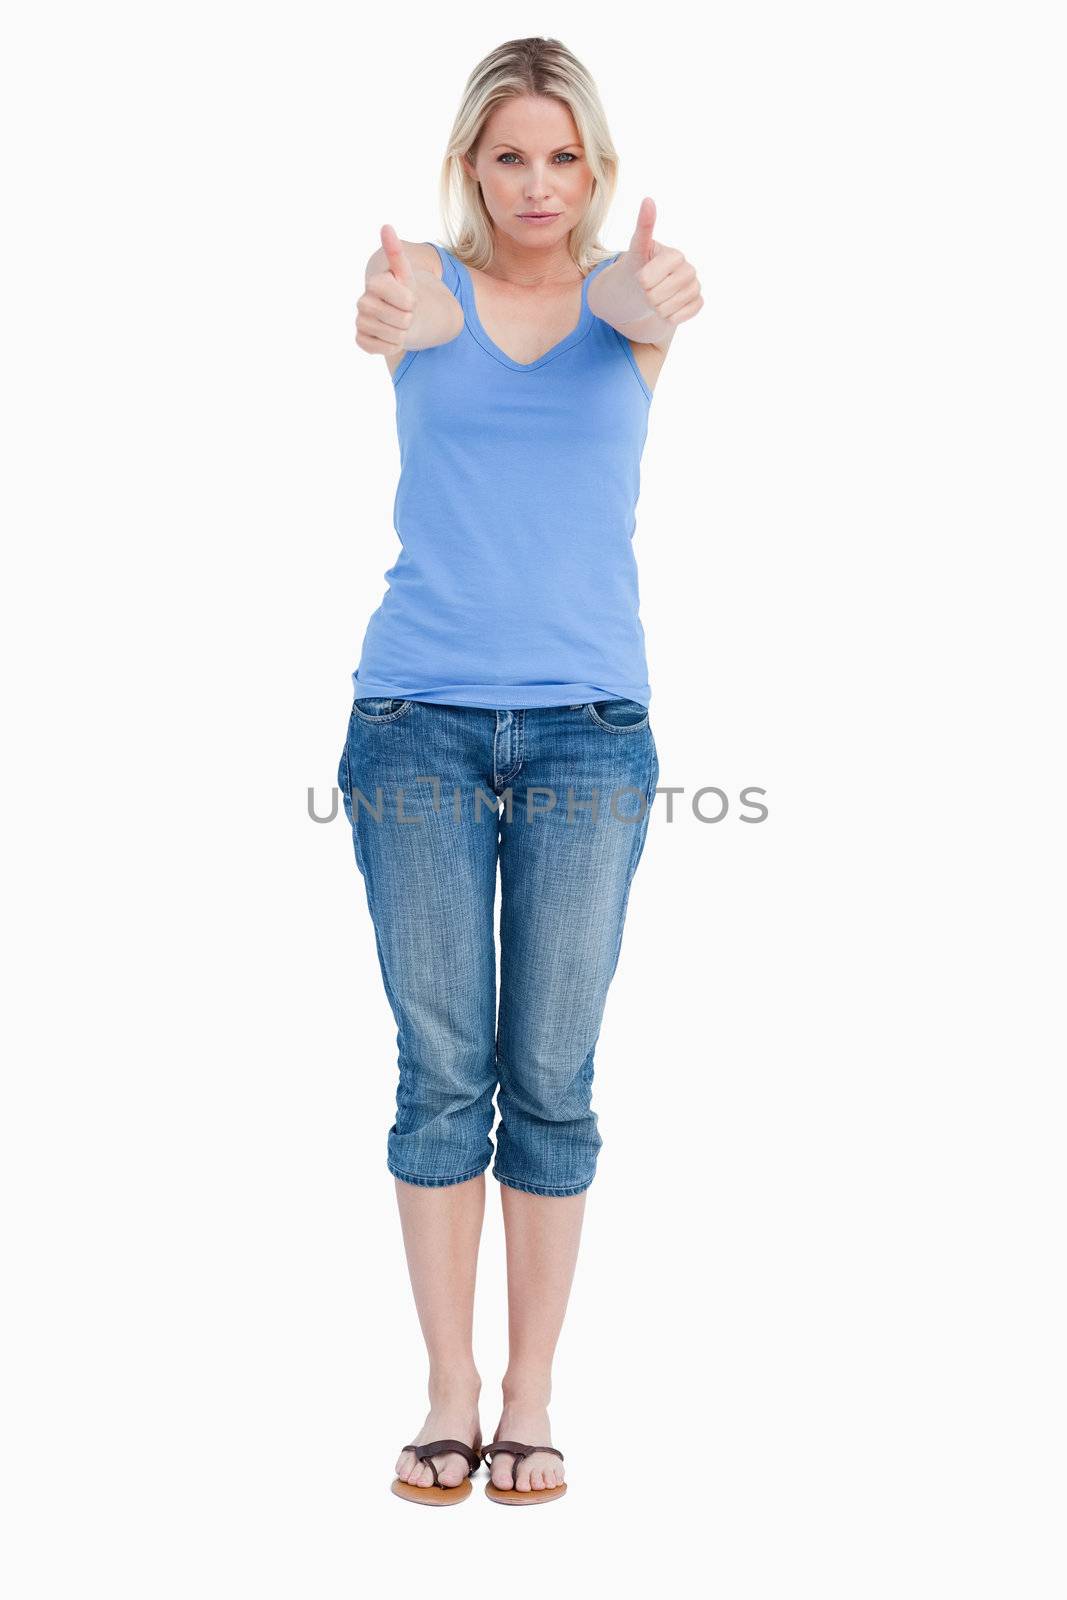 Serious blonde woman showing her thumbs up against a white background